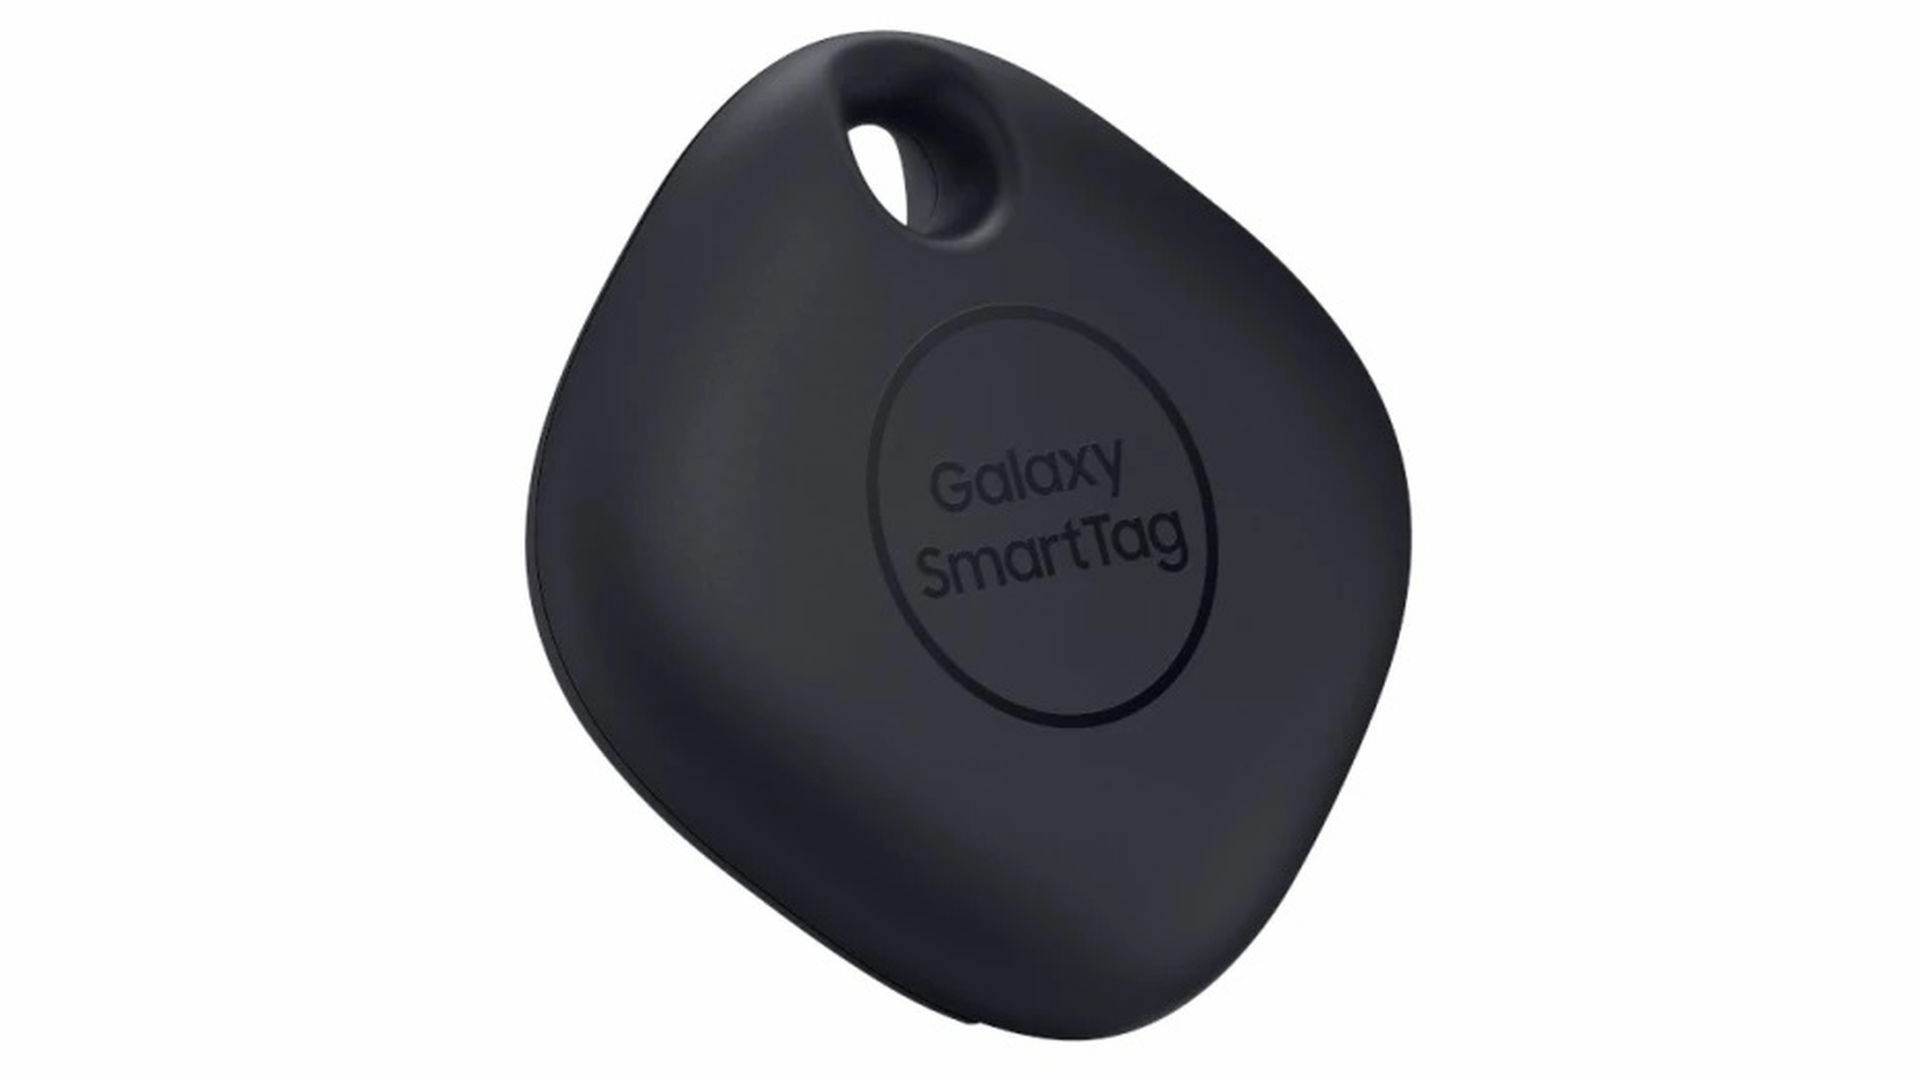 Samsung's Galaxy SmartTag location trackers double as IoT remotes -  SamMobile